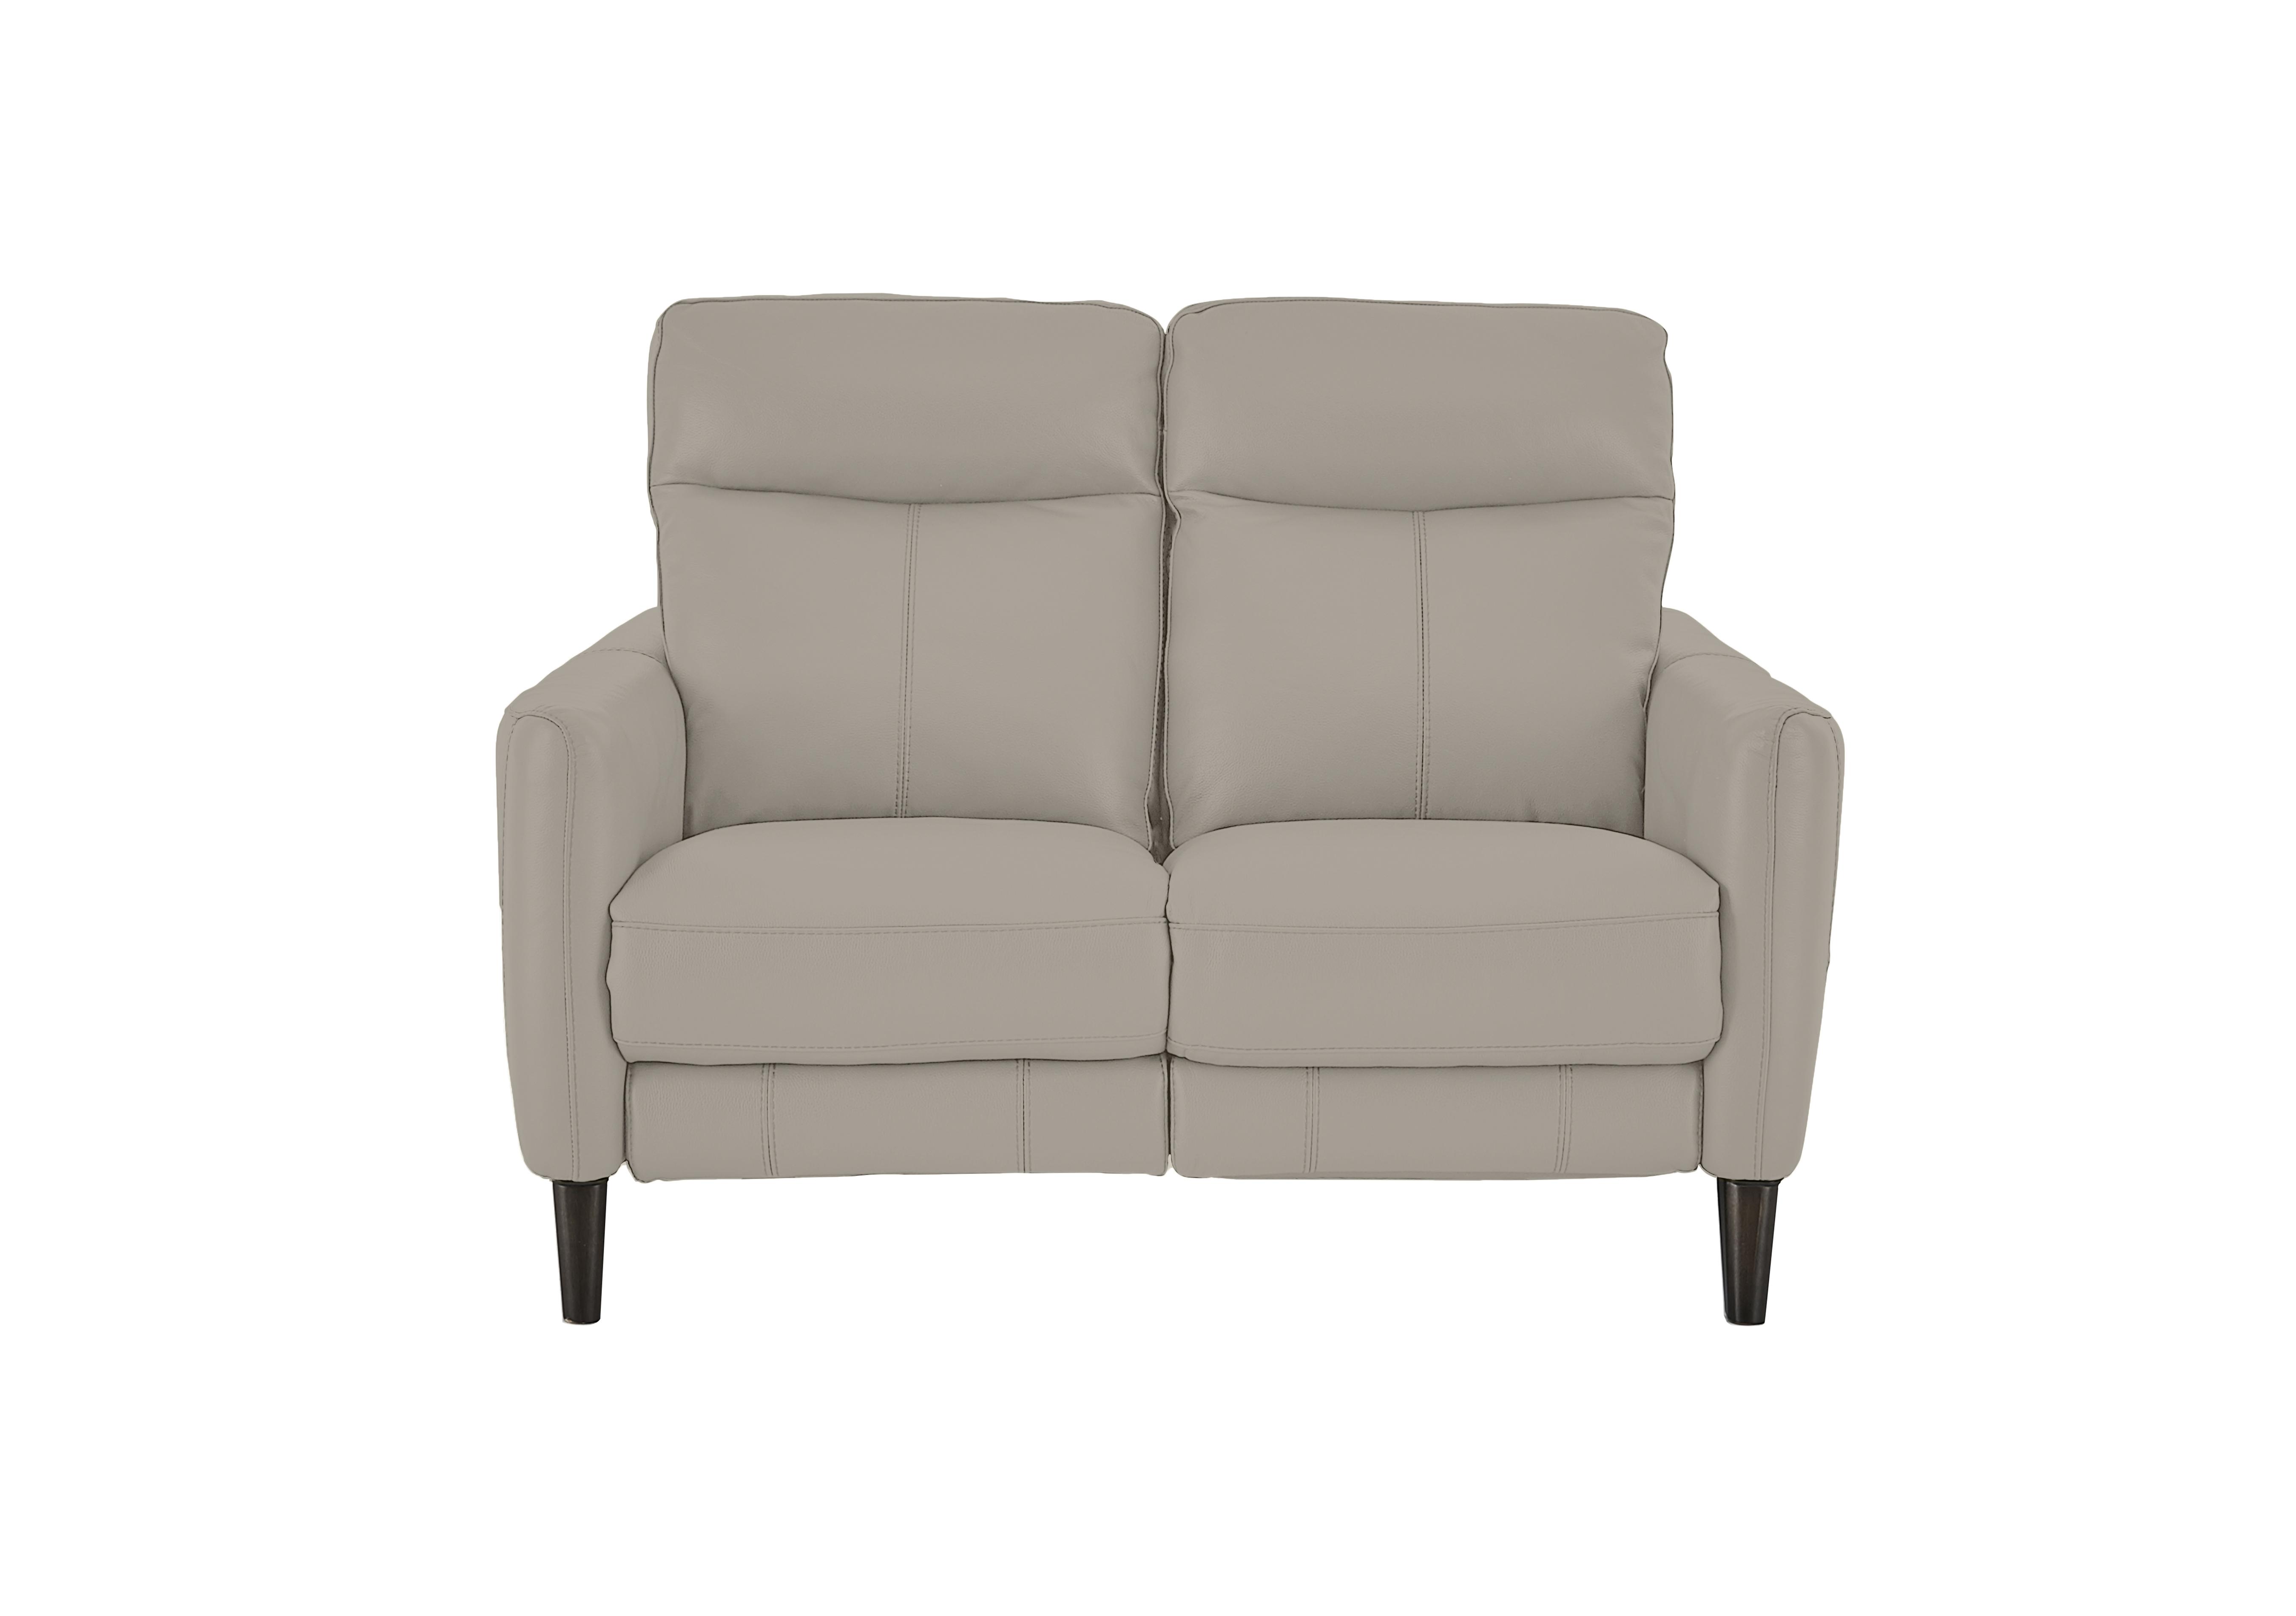 Compact Collection Petit 2 Seater Leather Sofa in Nc-946b Feather Grey on Furniture Village